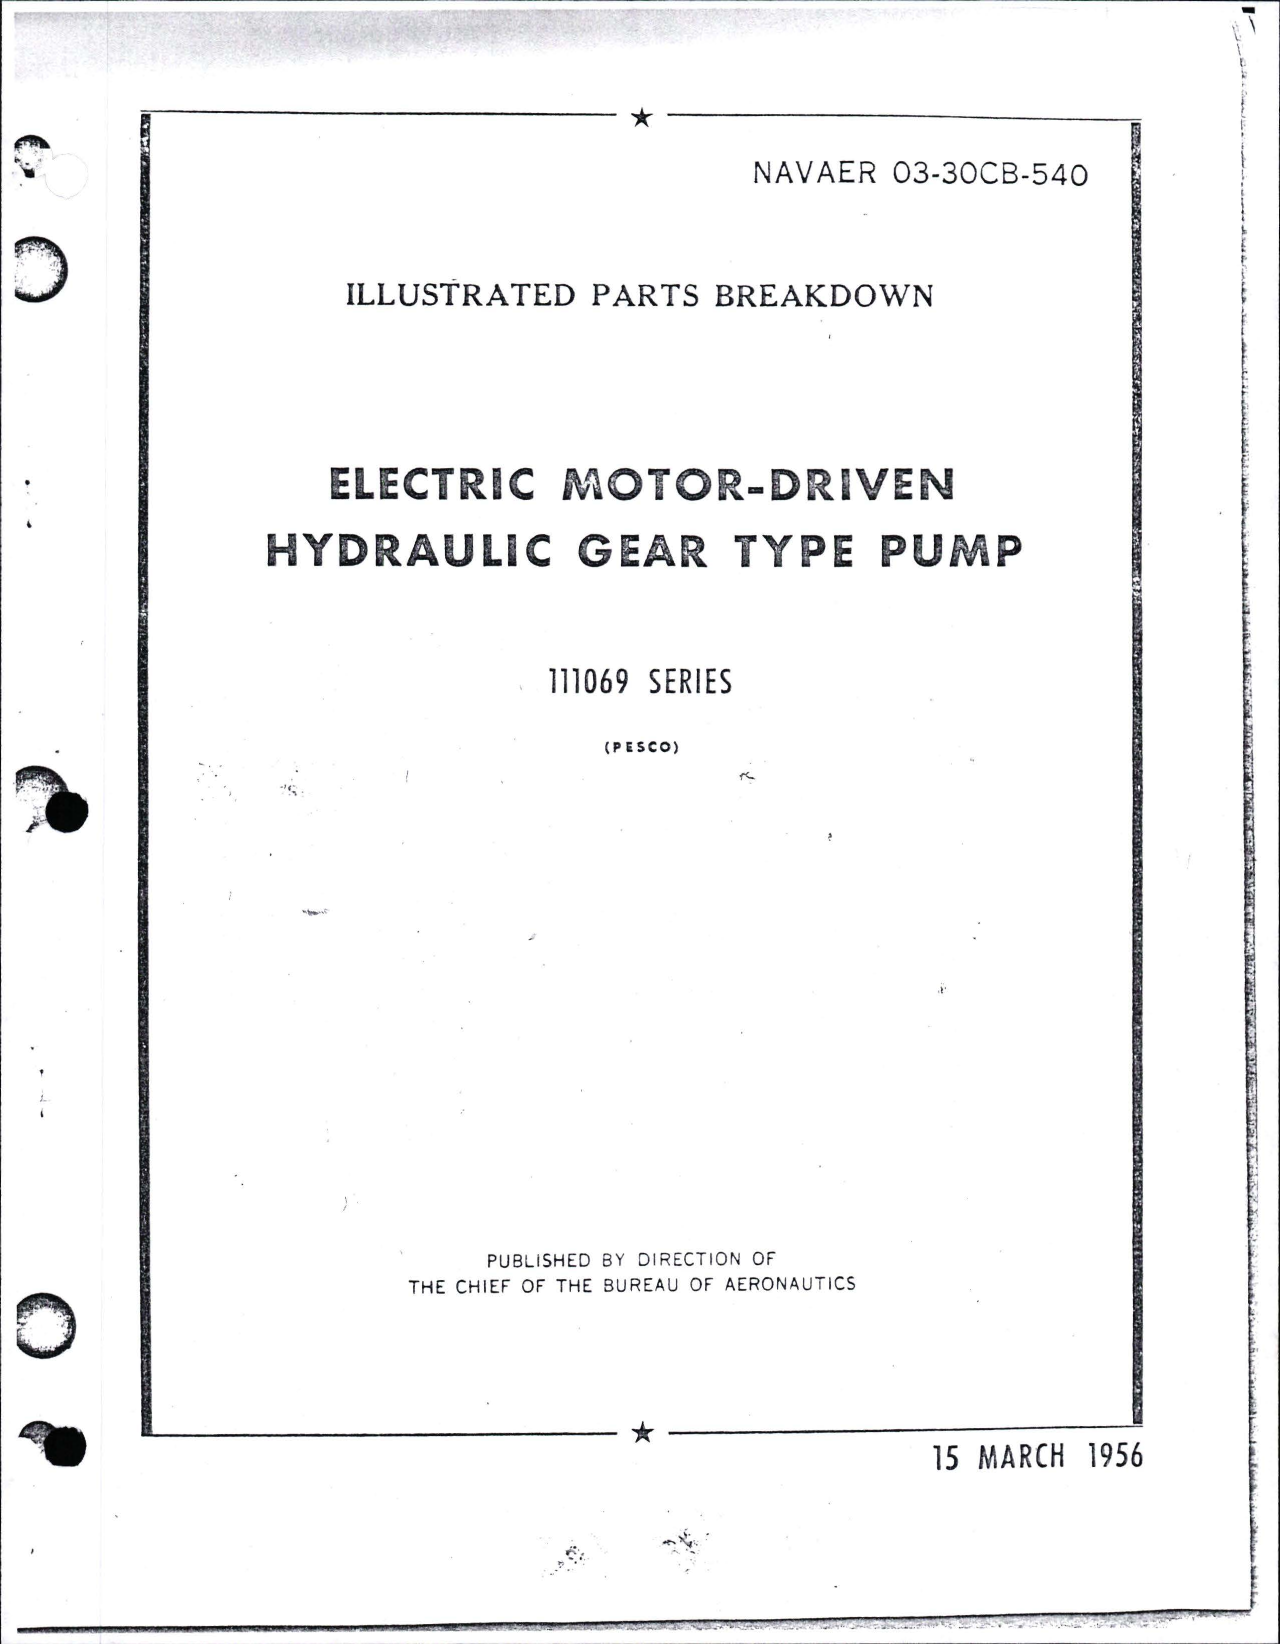 Sample page 1 from AirCorps Library document: Illustrated Parts Breakdown for Electric Motor Driven Hydraulic Gear Type Pump - 111069 Series